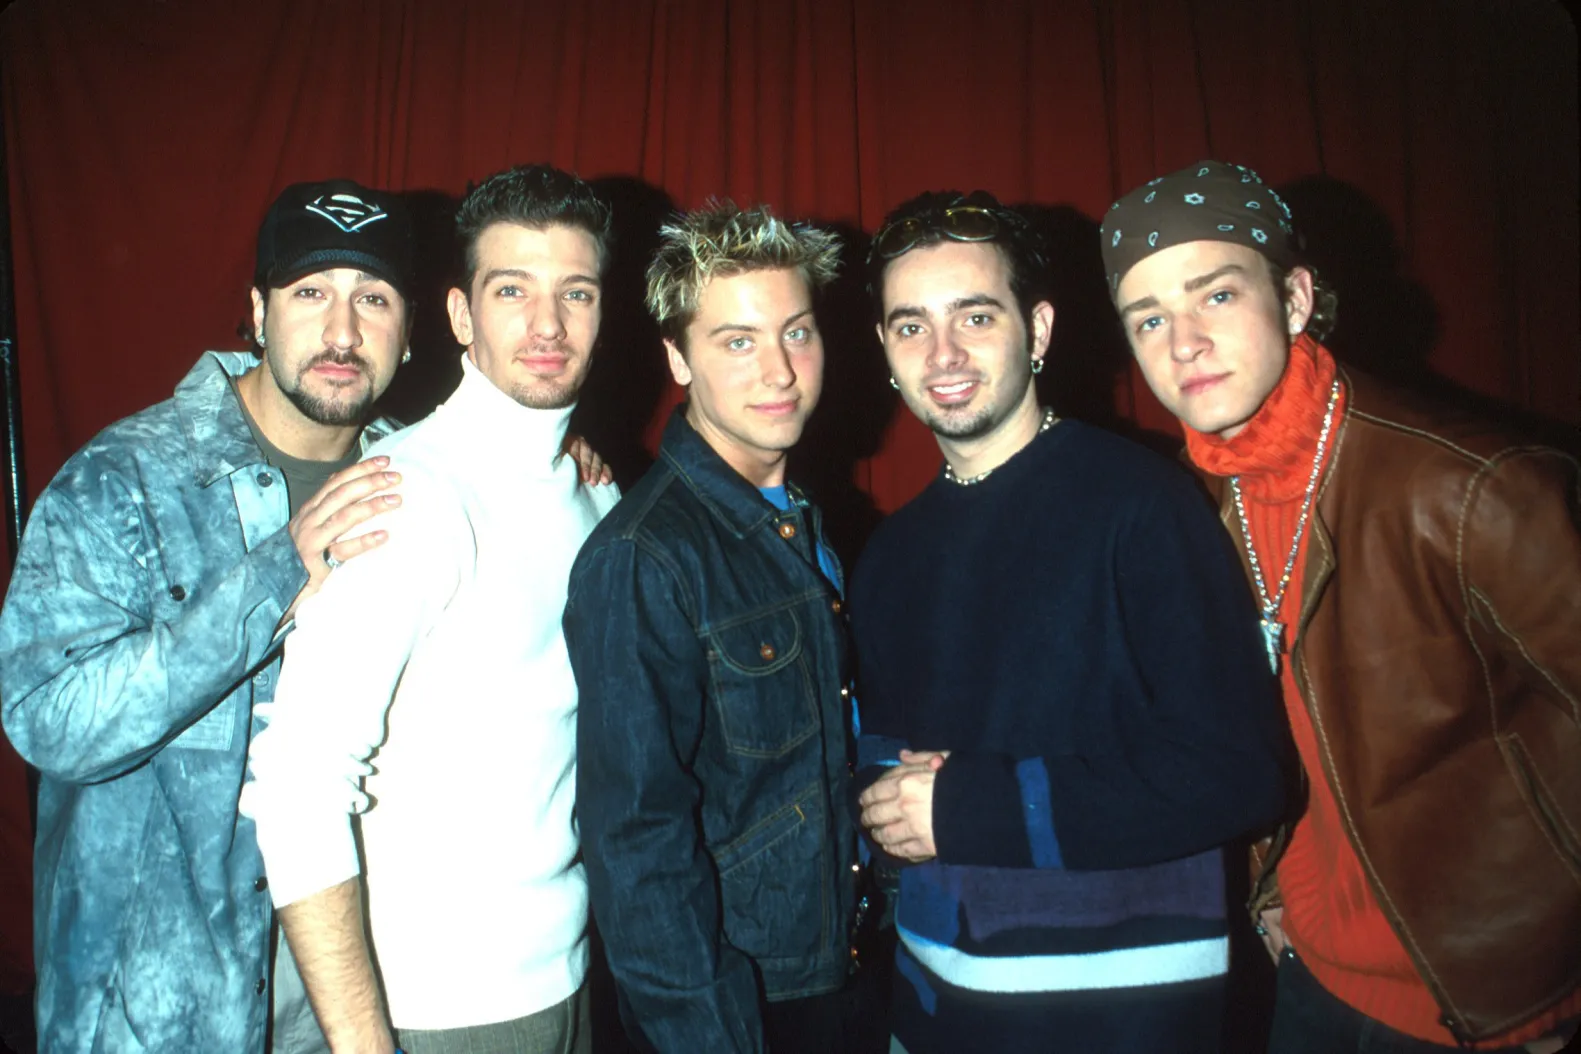 NSYNC Live in Concert: Nostalgic Classics and Unearthed Musical Gems ...